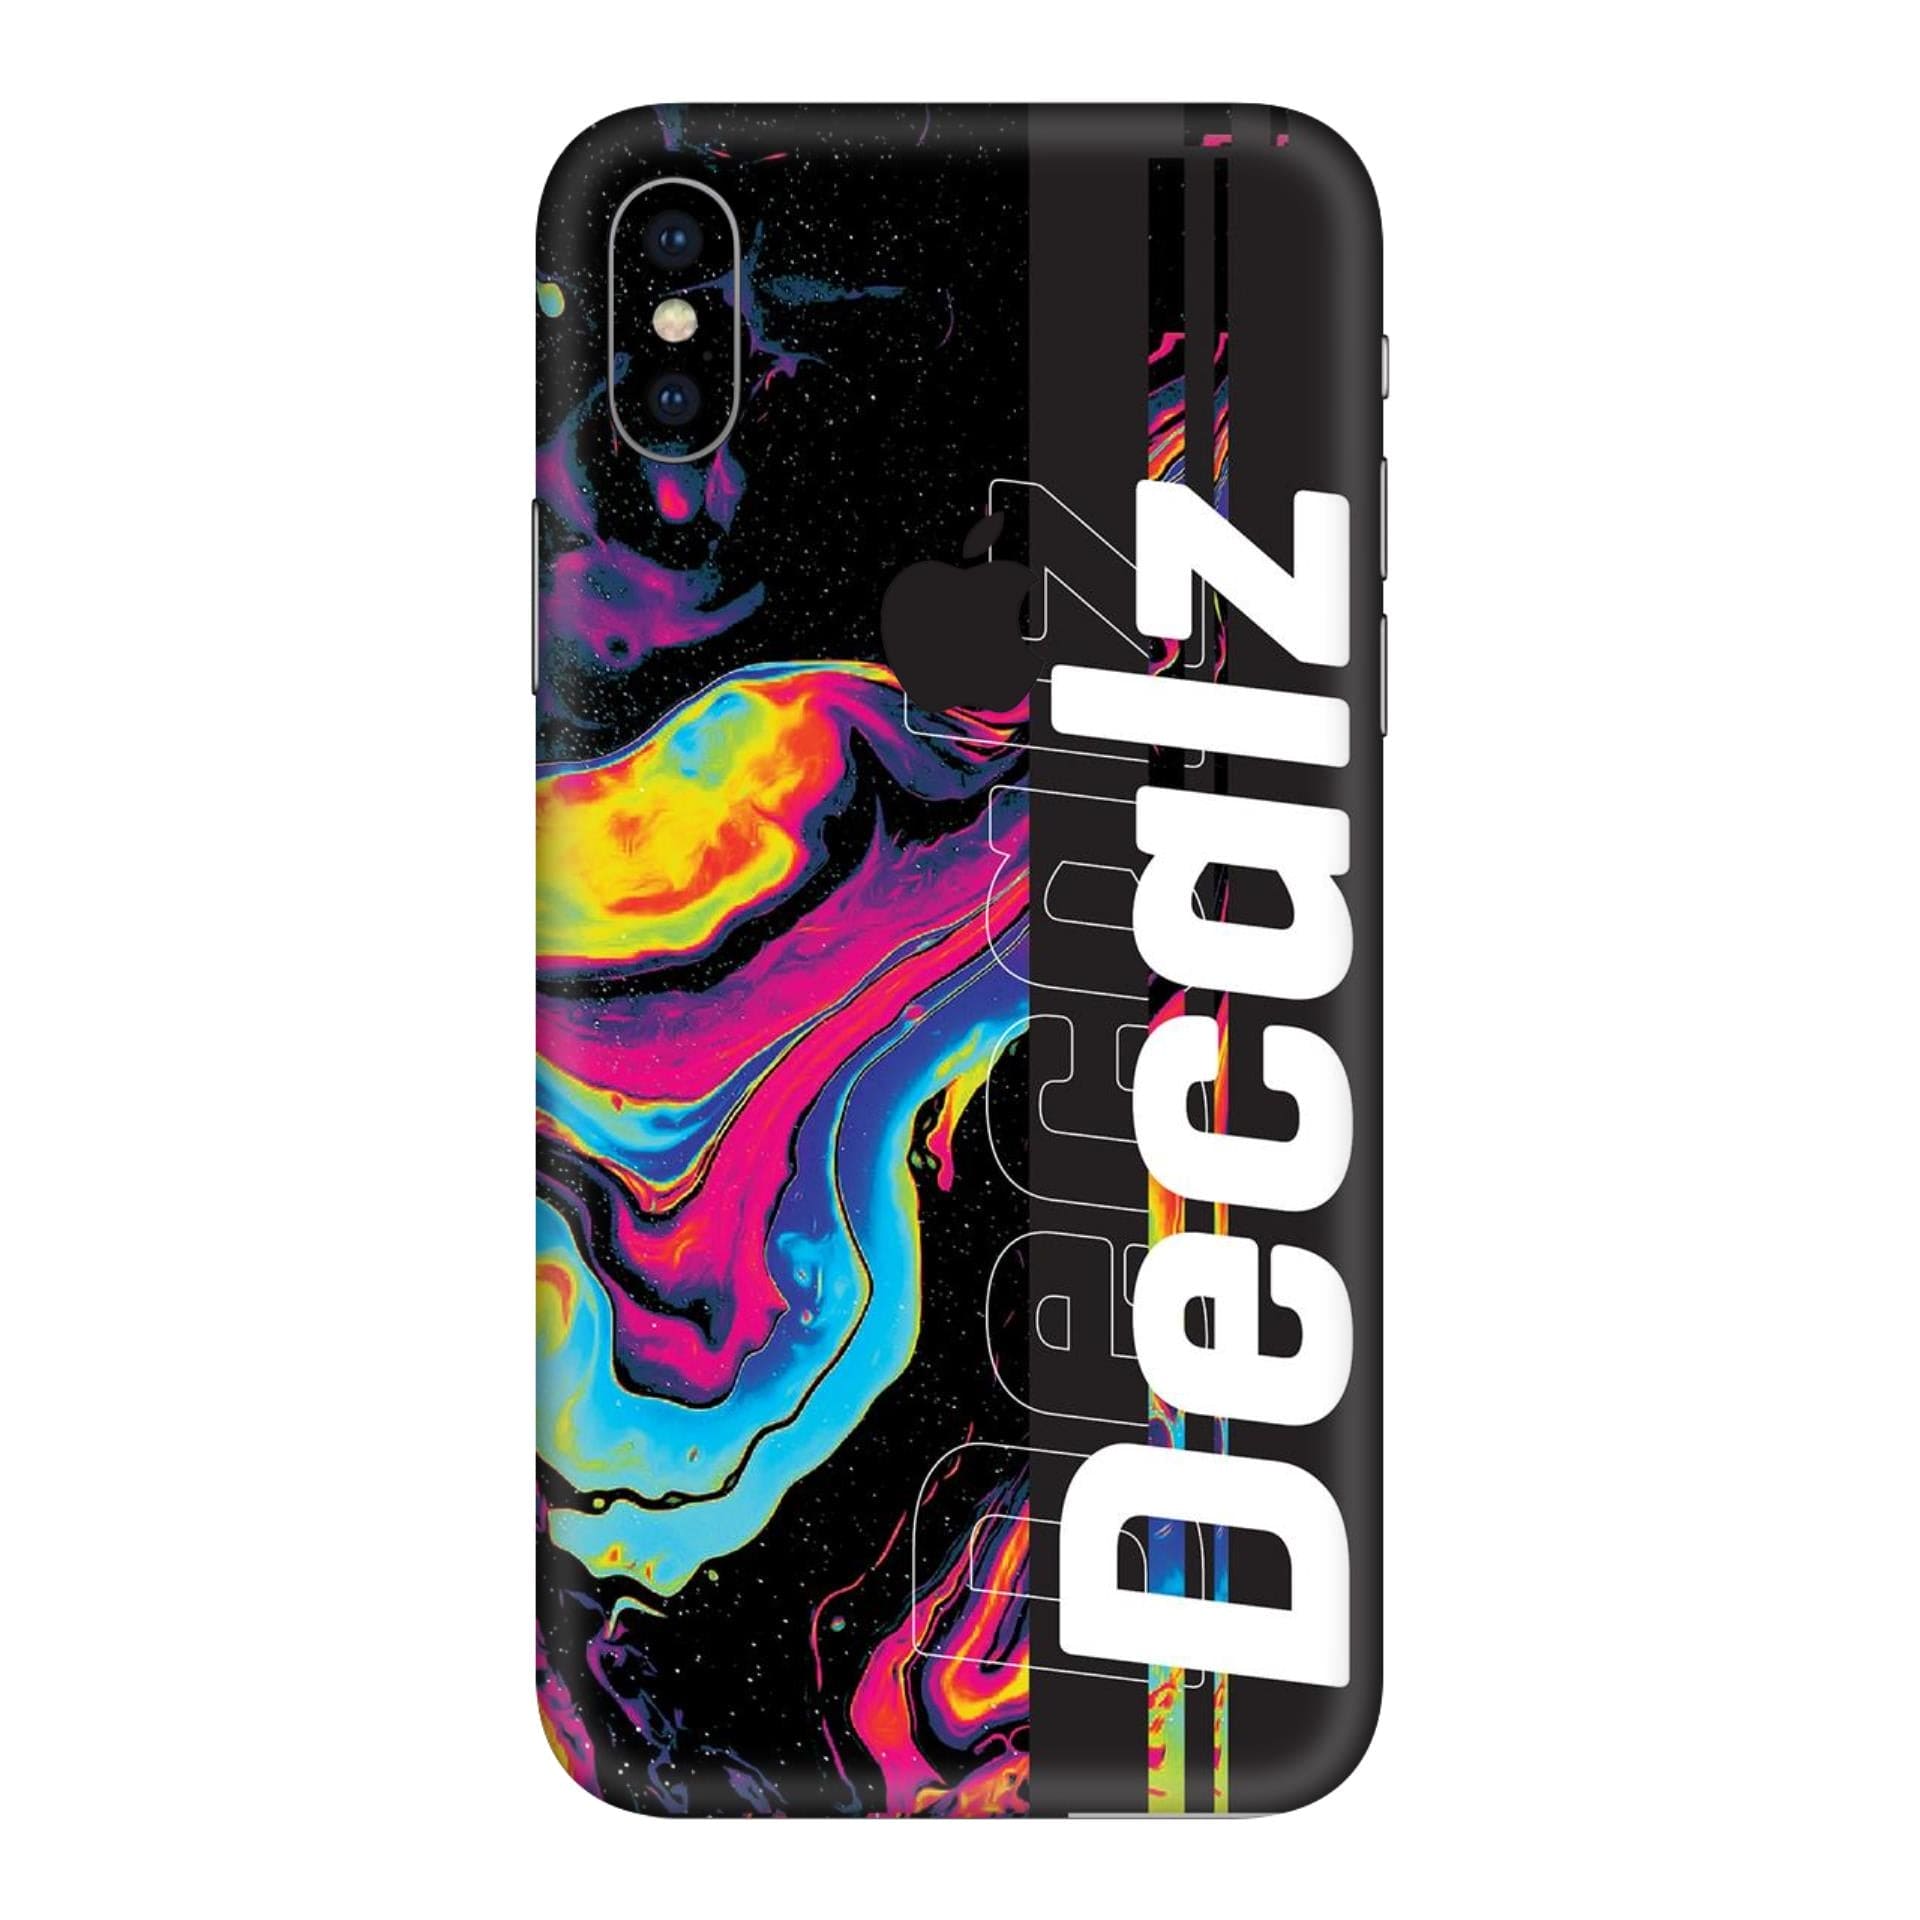 iphone XS Max Decalz skins